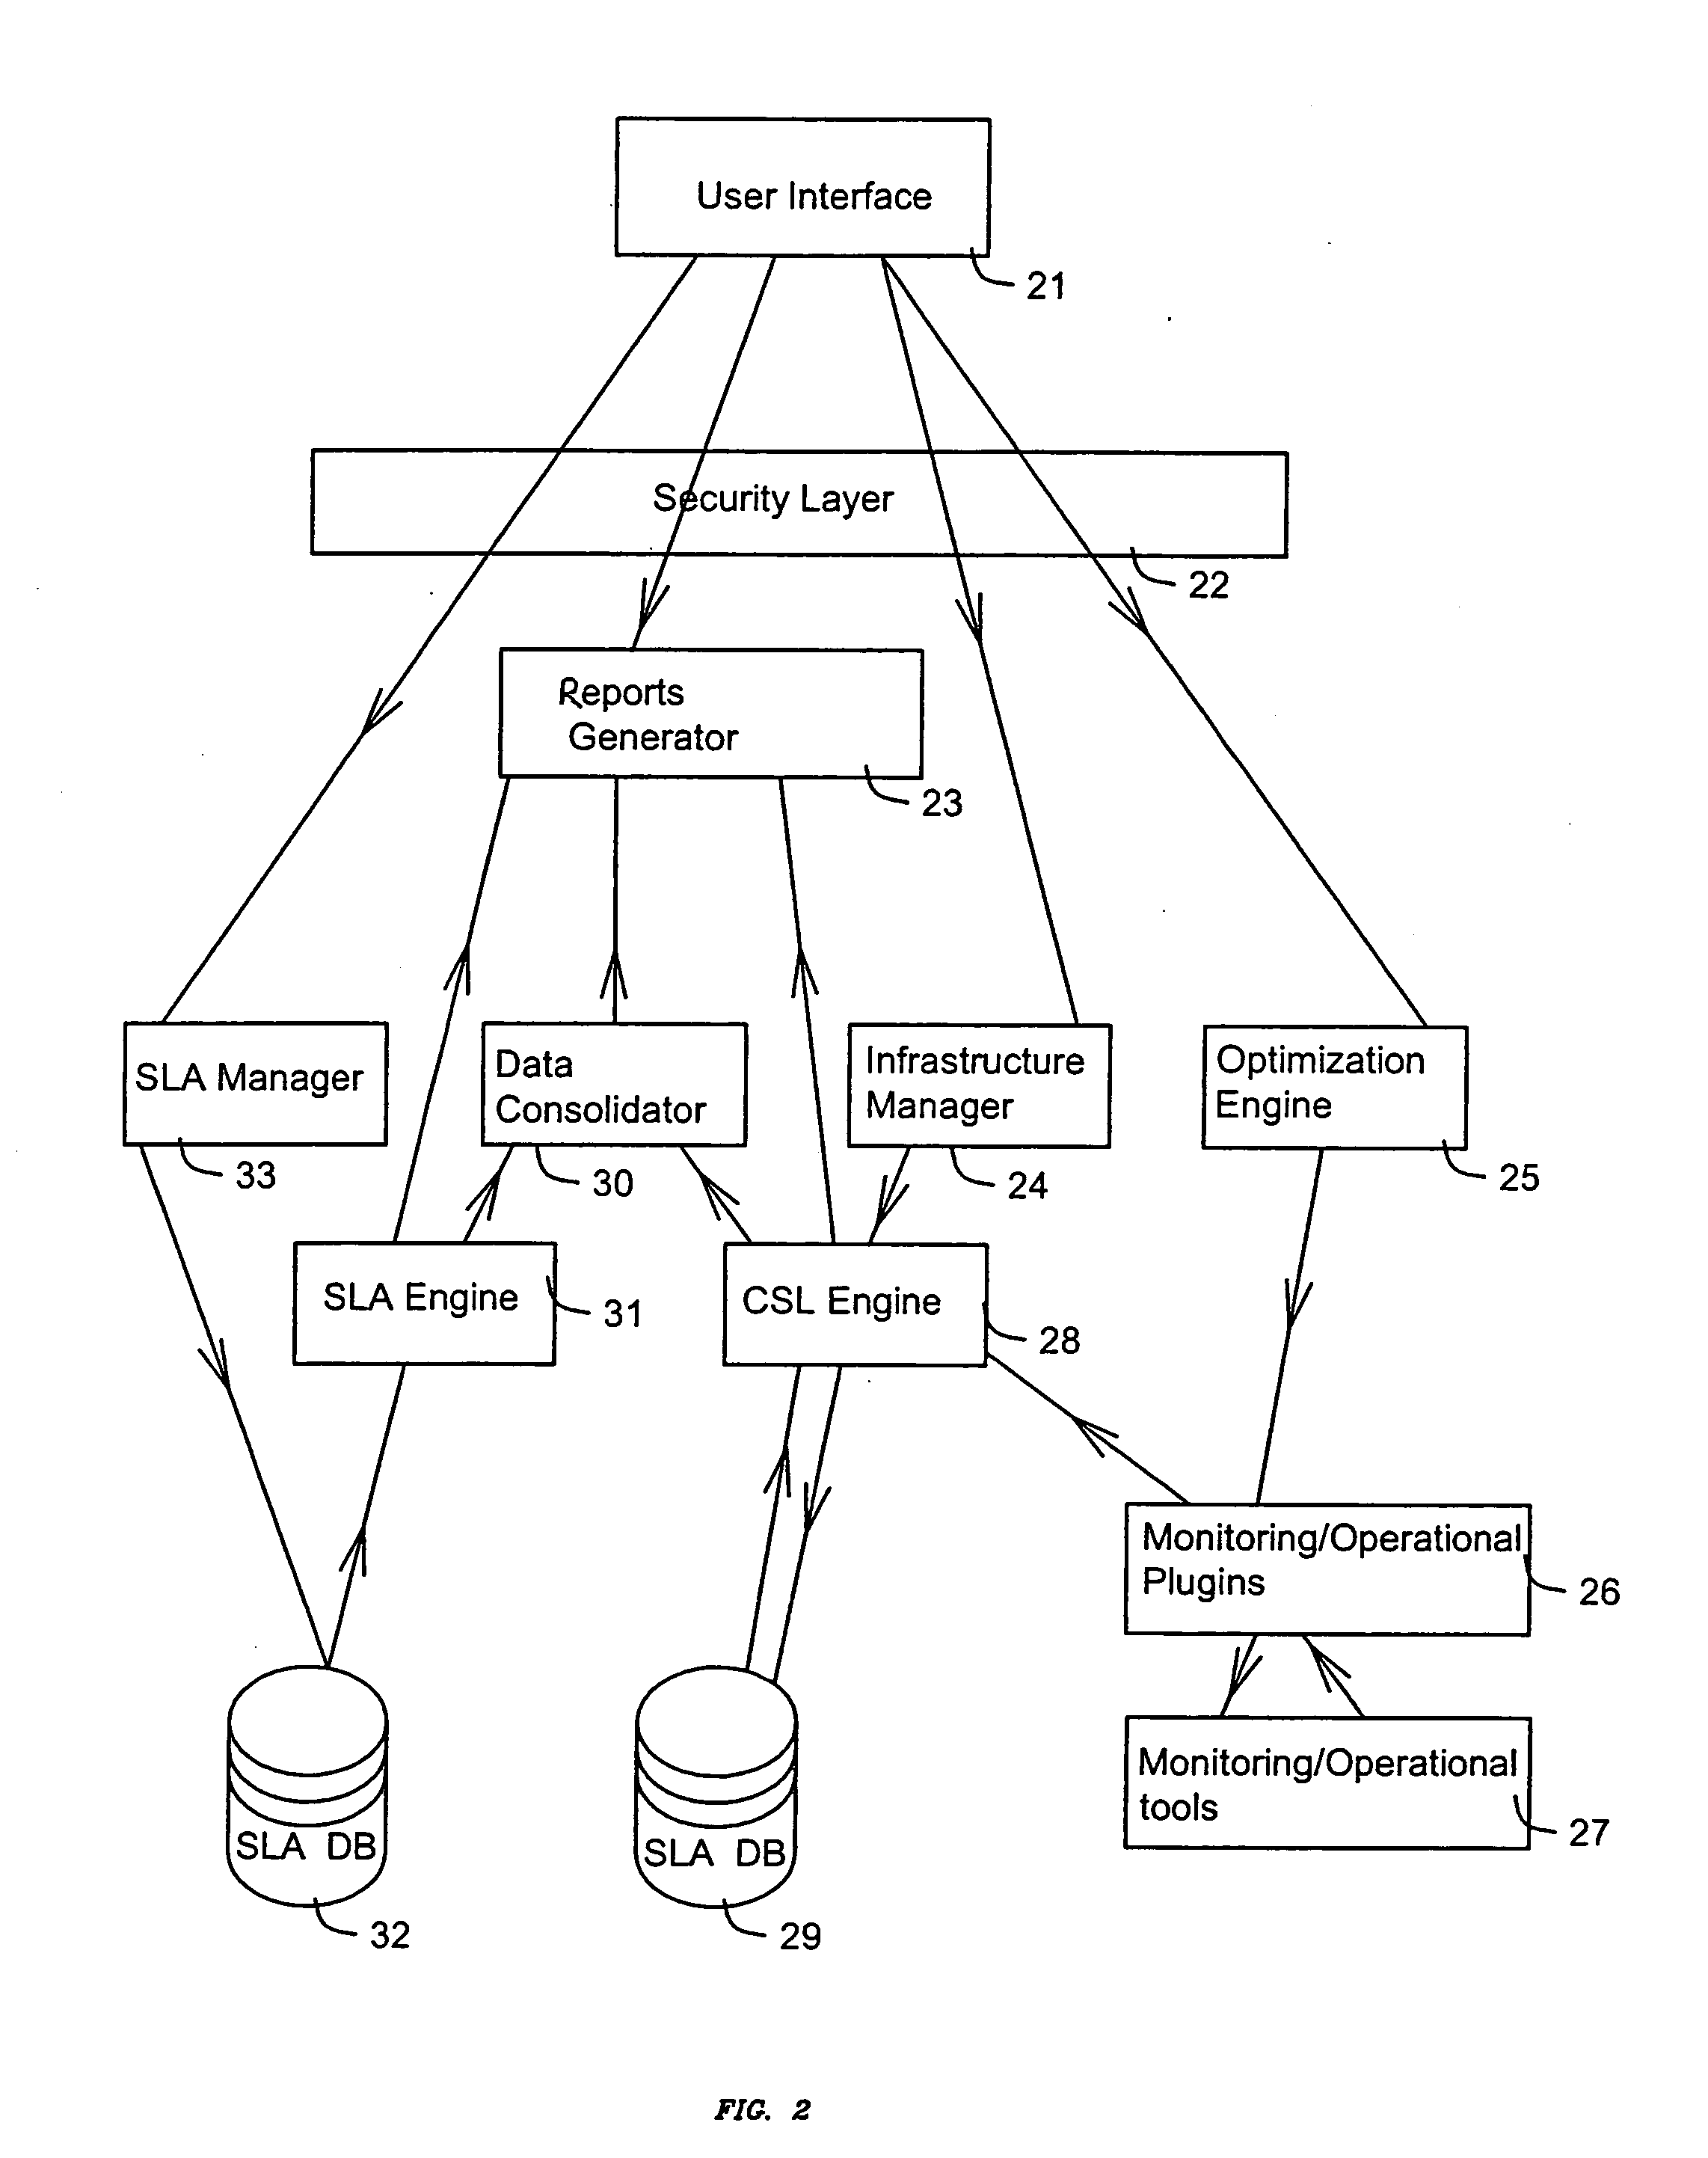 System and method for analyzing and coordinating Service-Level-Agreements (SLA) for Application-Service-Providers (ASP)